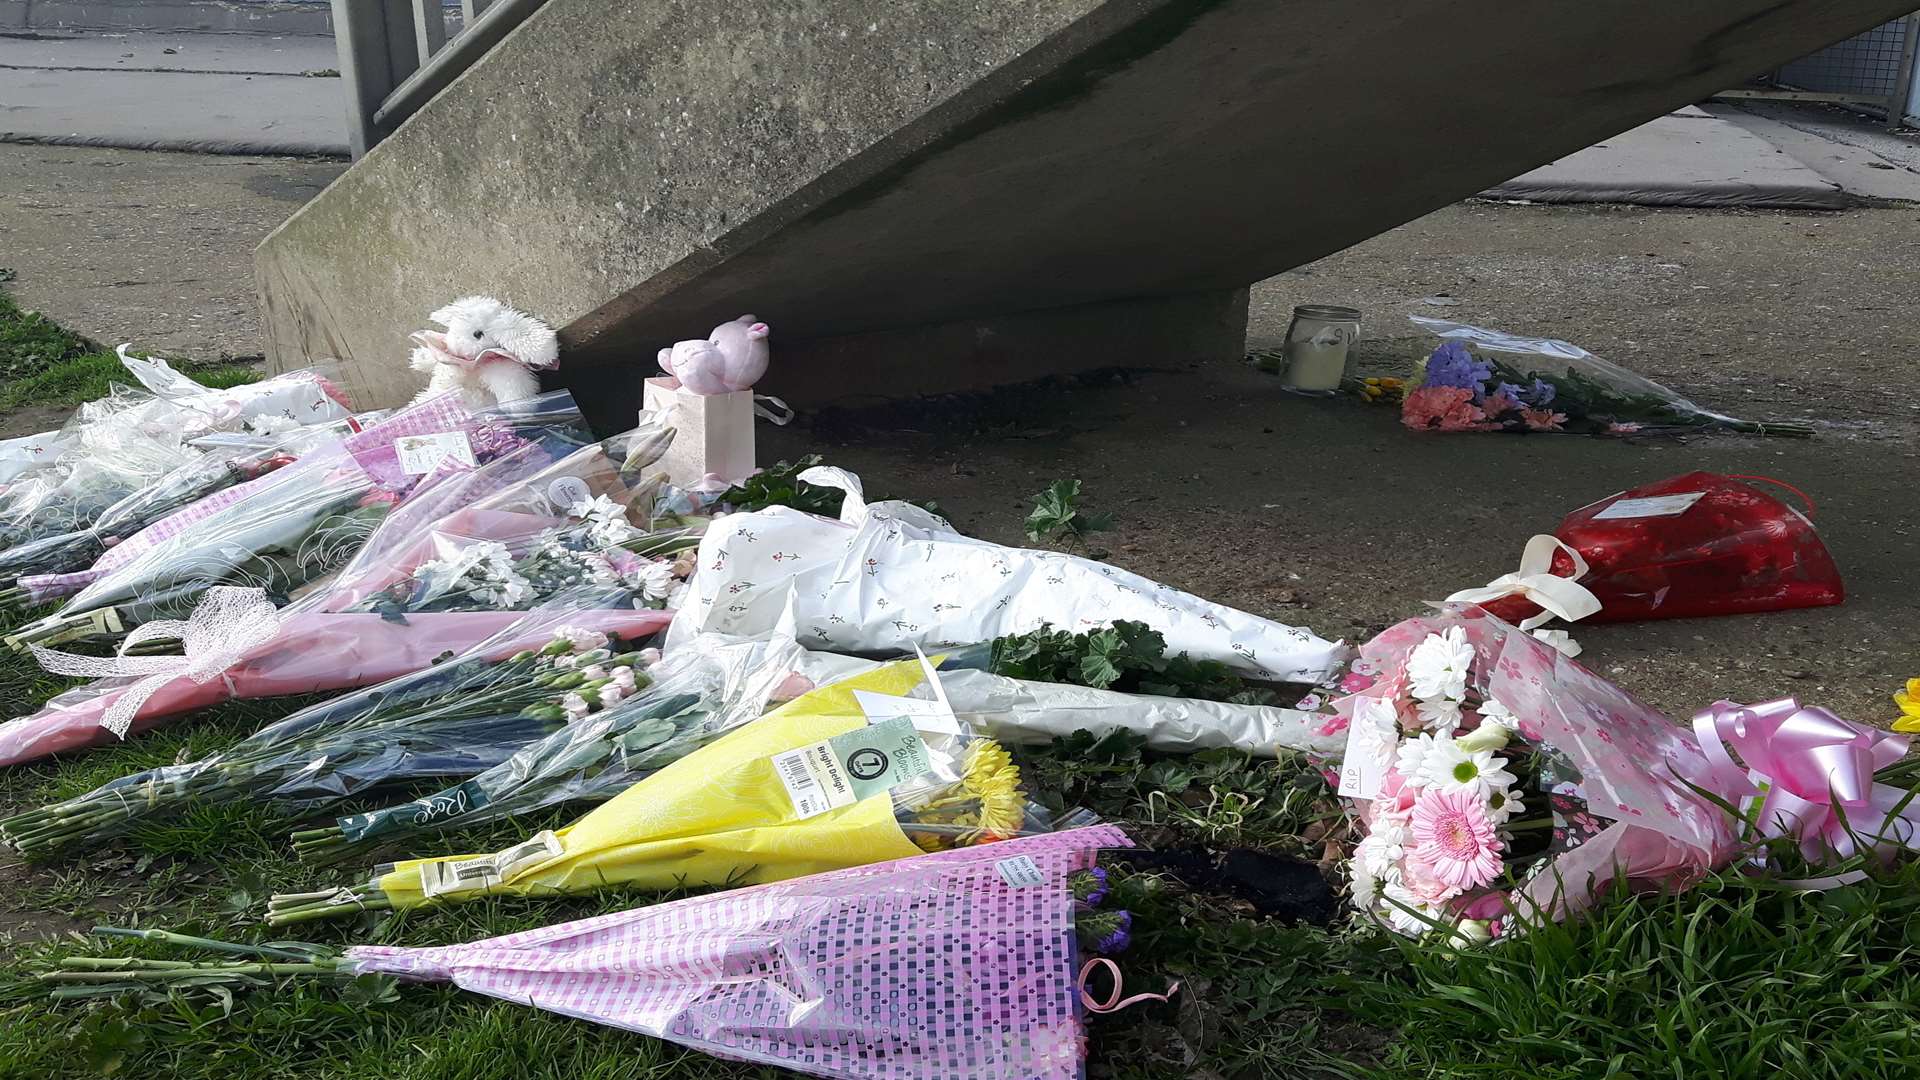 Flowers, candles and teddy bears were left where the body of the baby girl was discovered